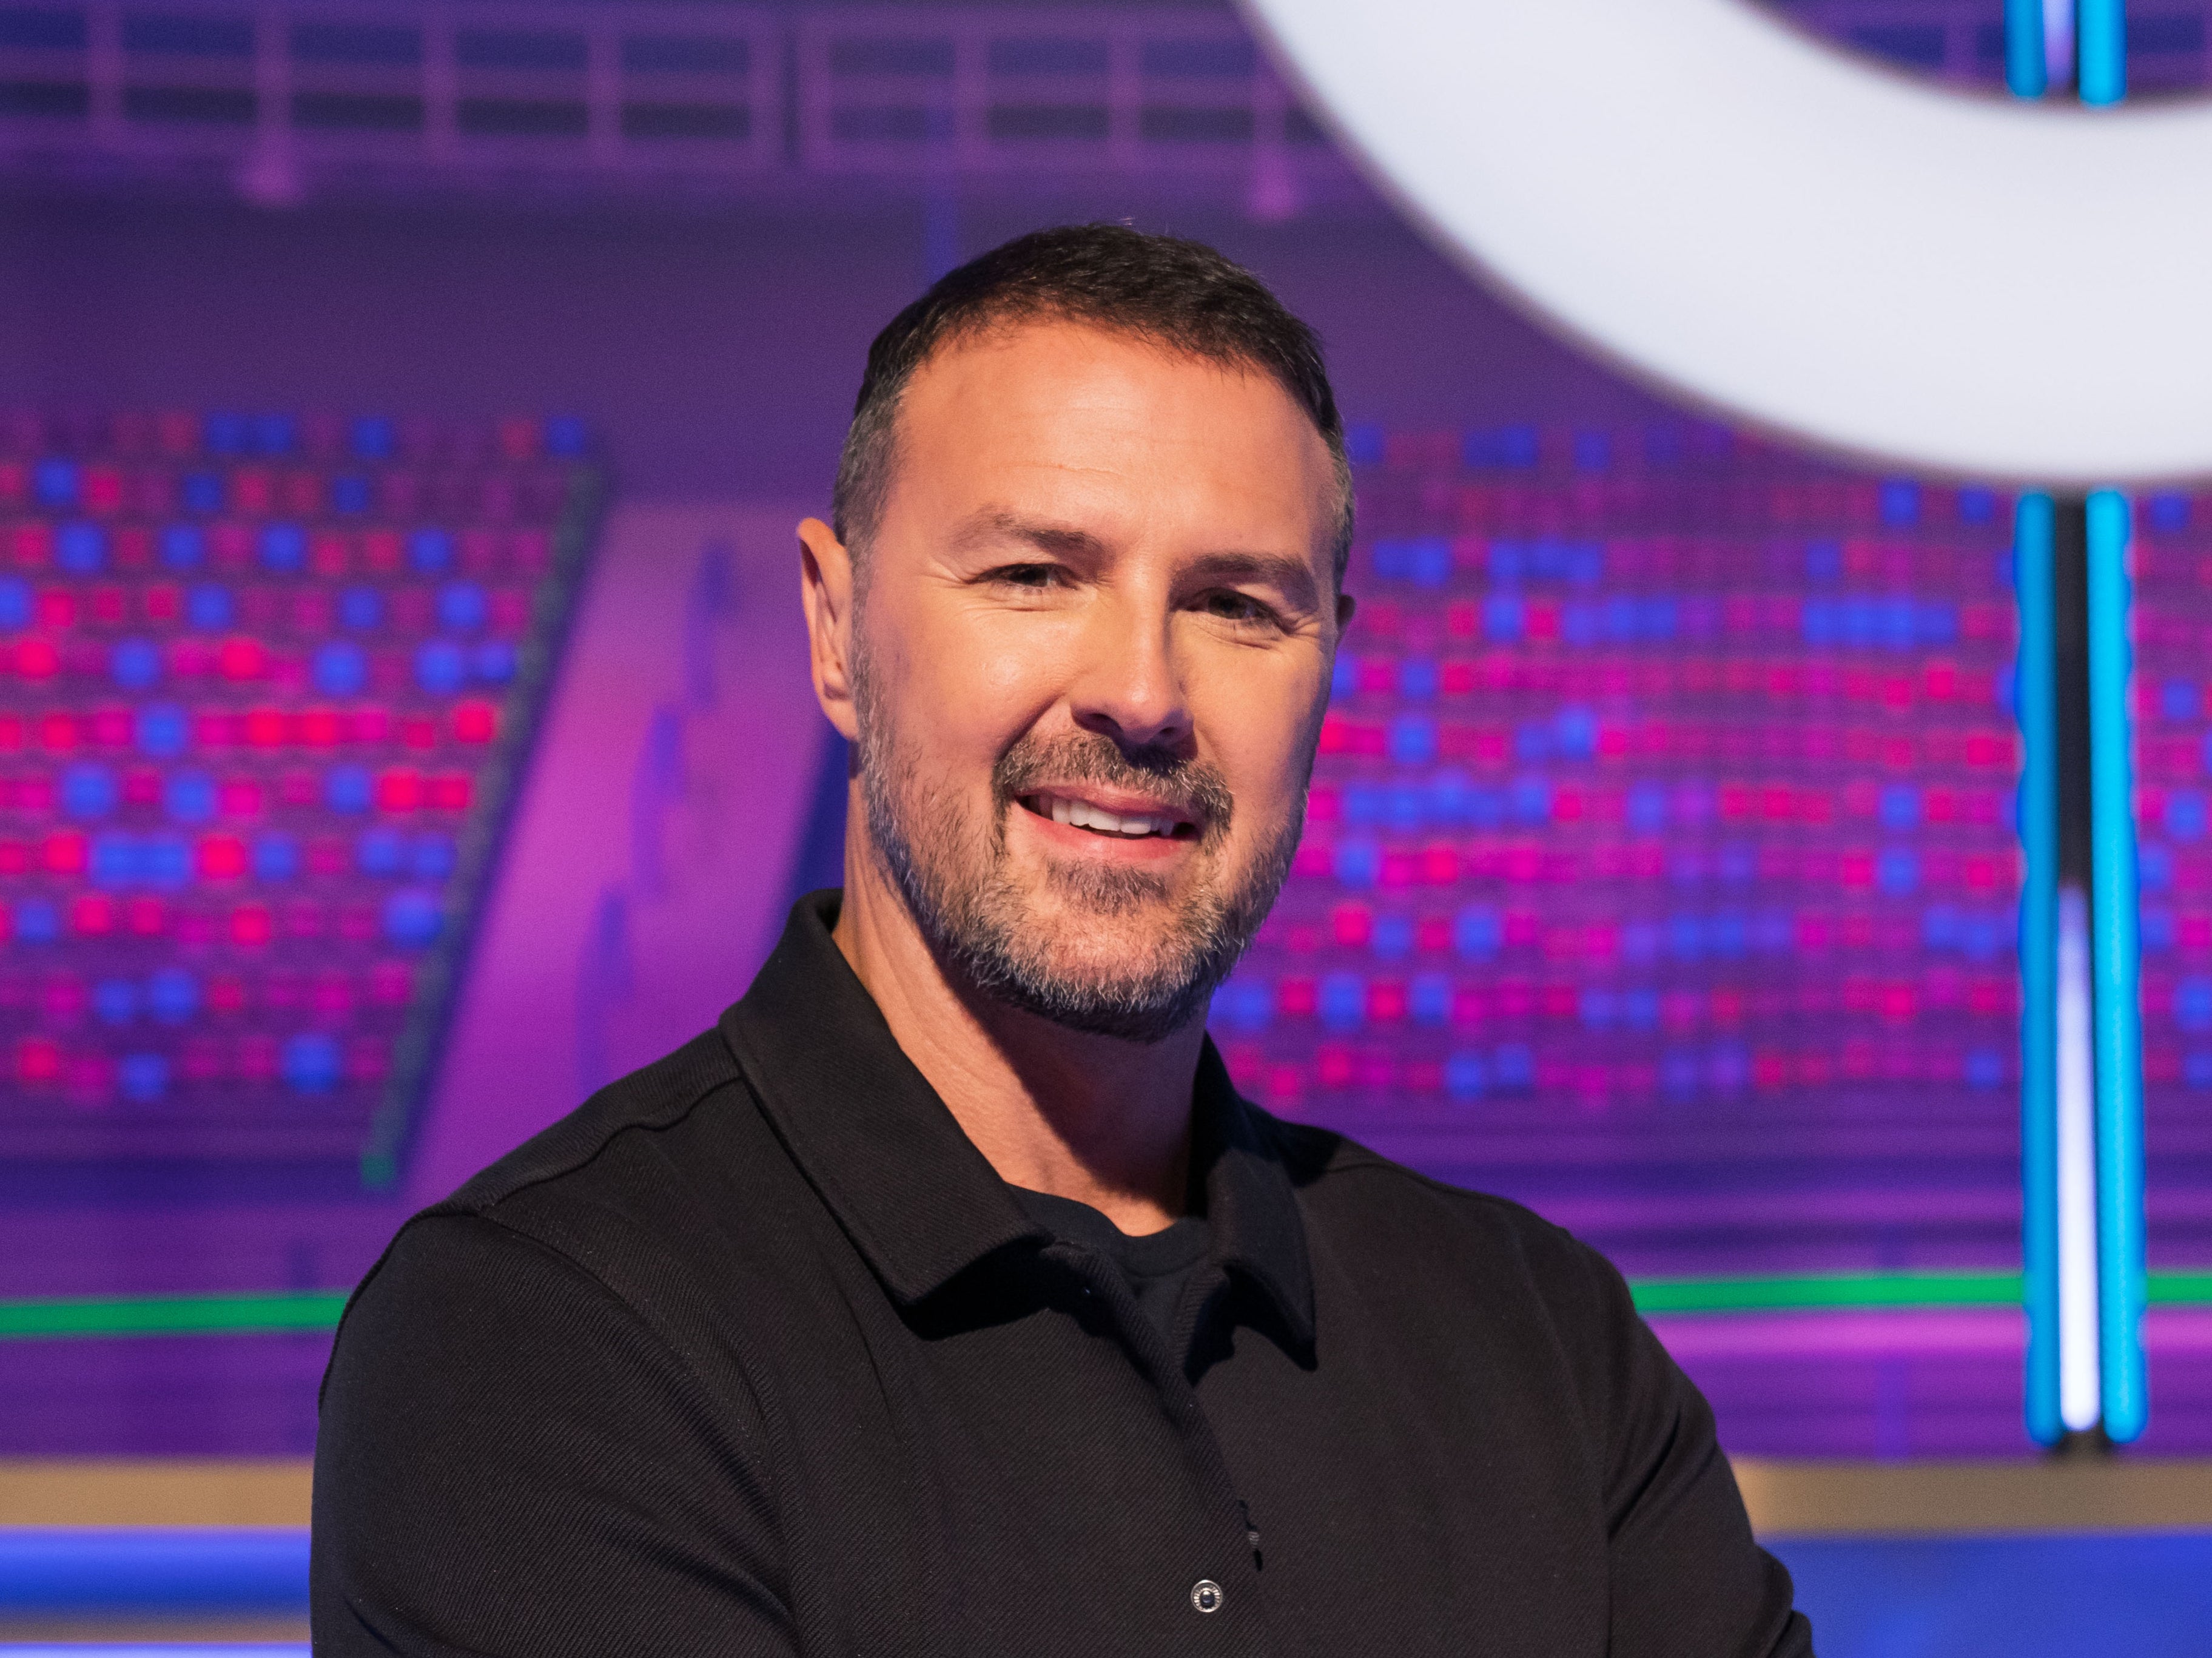 Paddy McGuinness, host of the current iteration of ‘A Question of Sport’ on the BBC